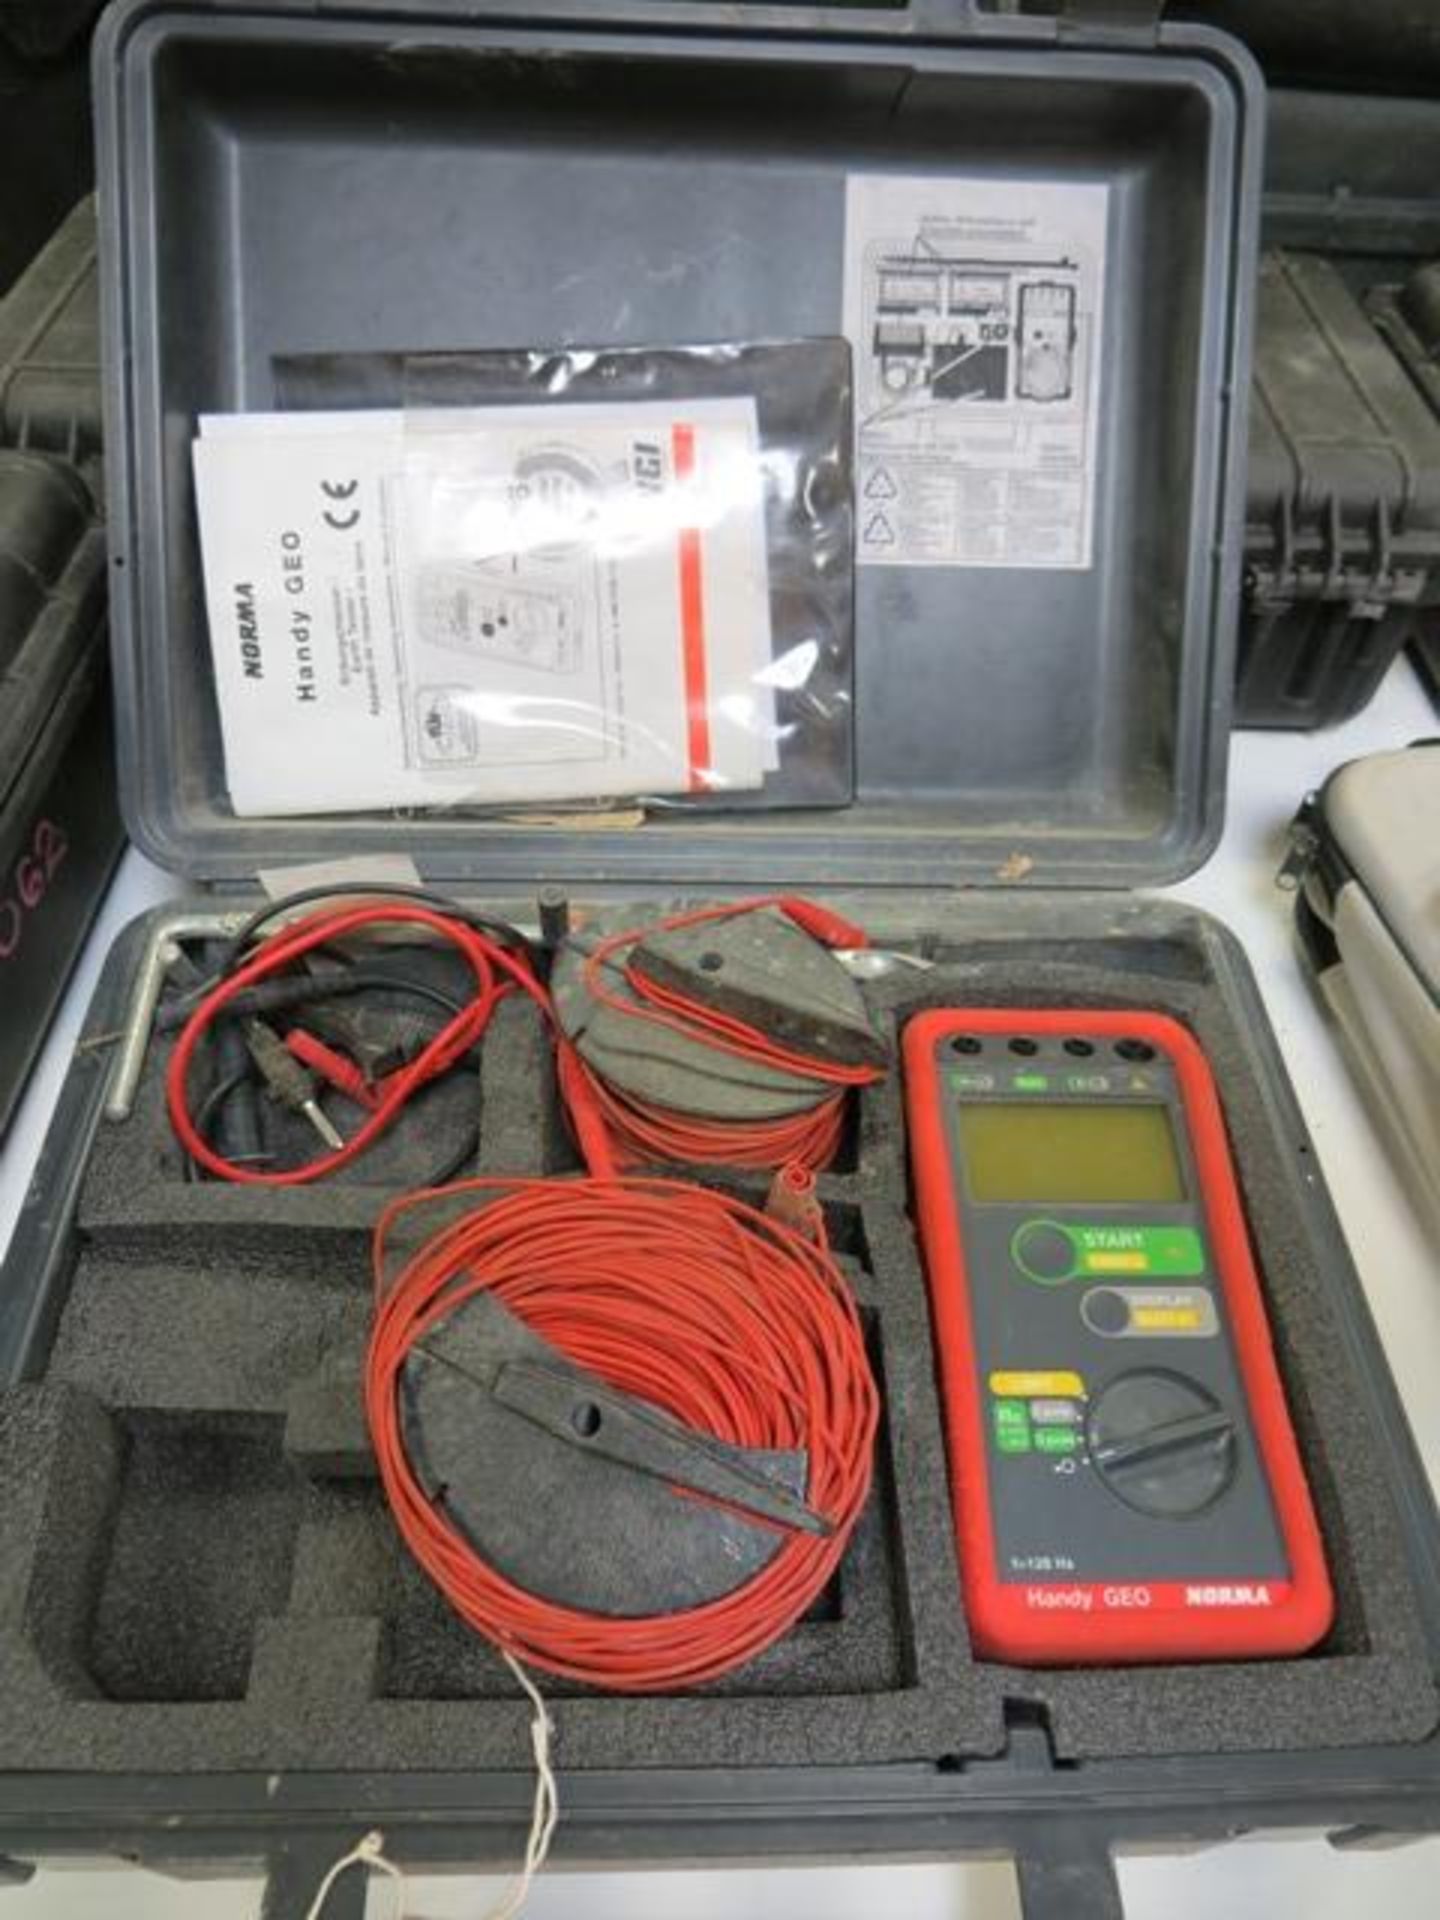 Geo earth resistance tester * This lot is located at Unit 15, Horizon Business Centre, Alder